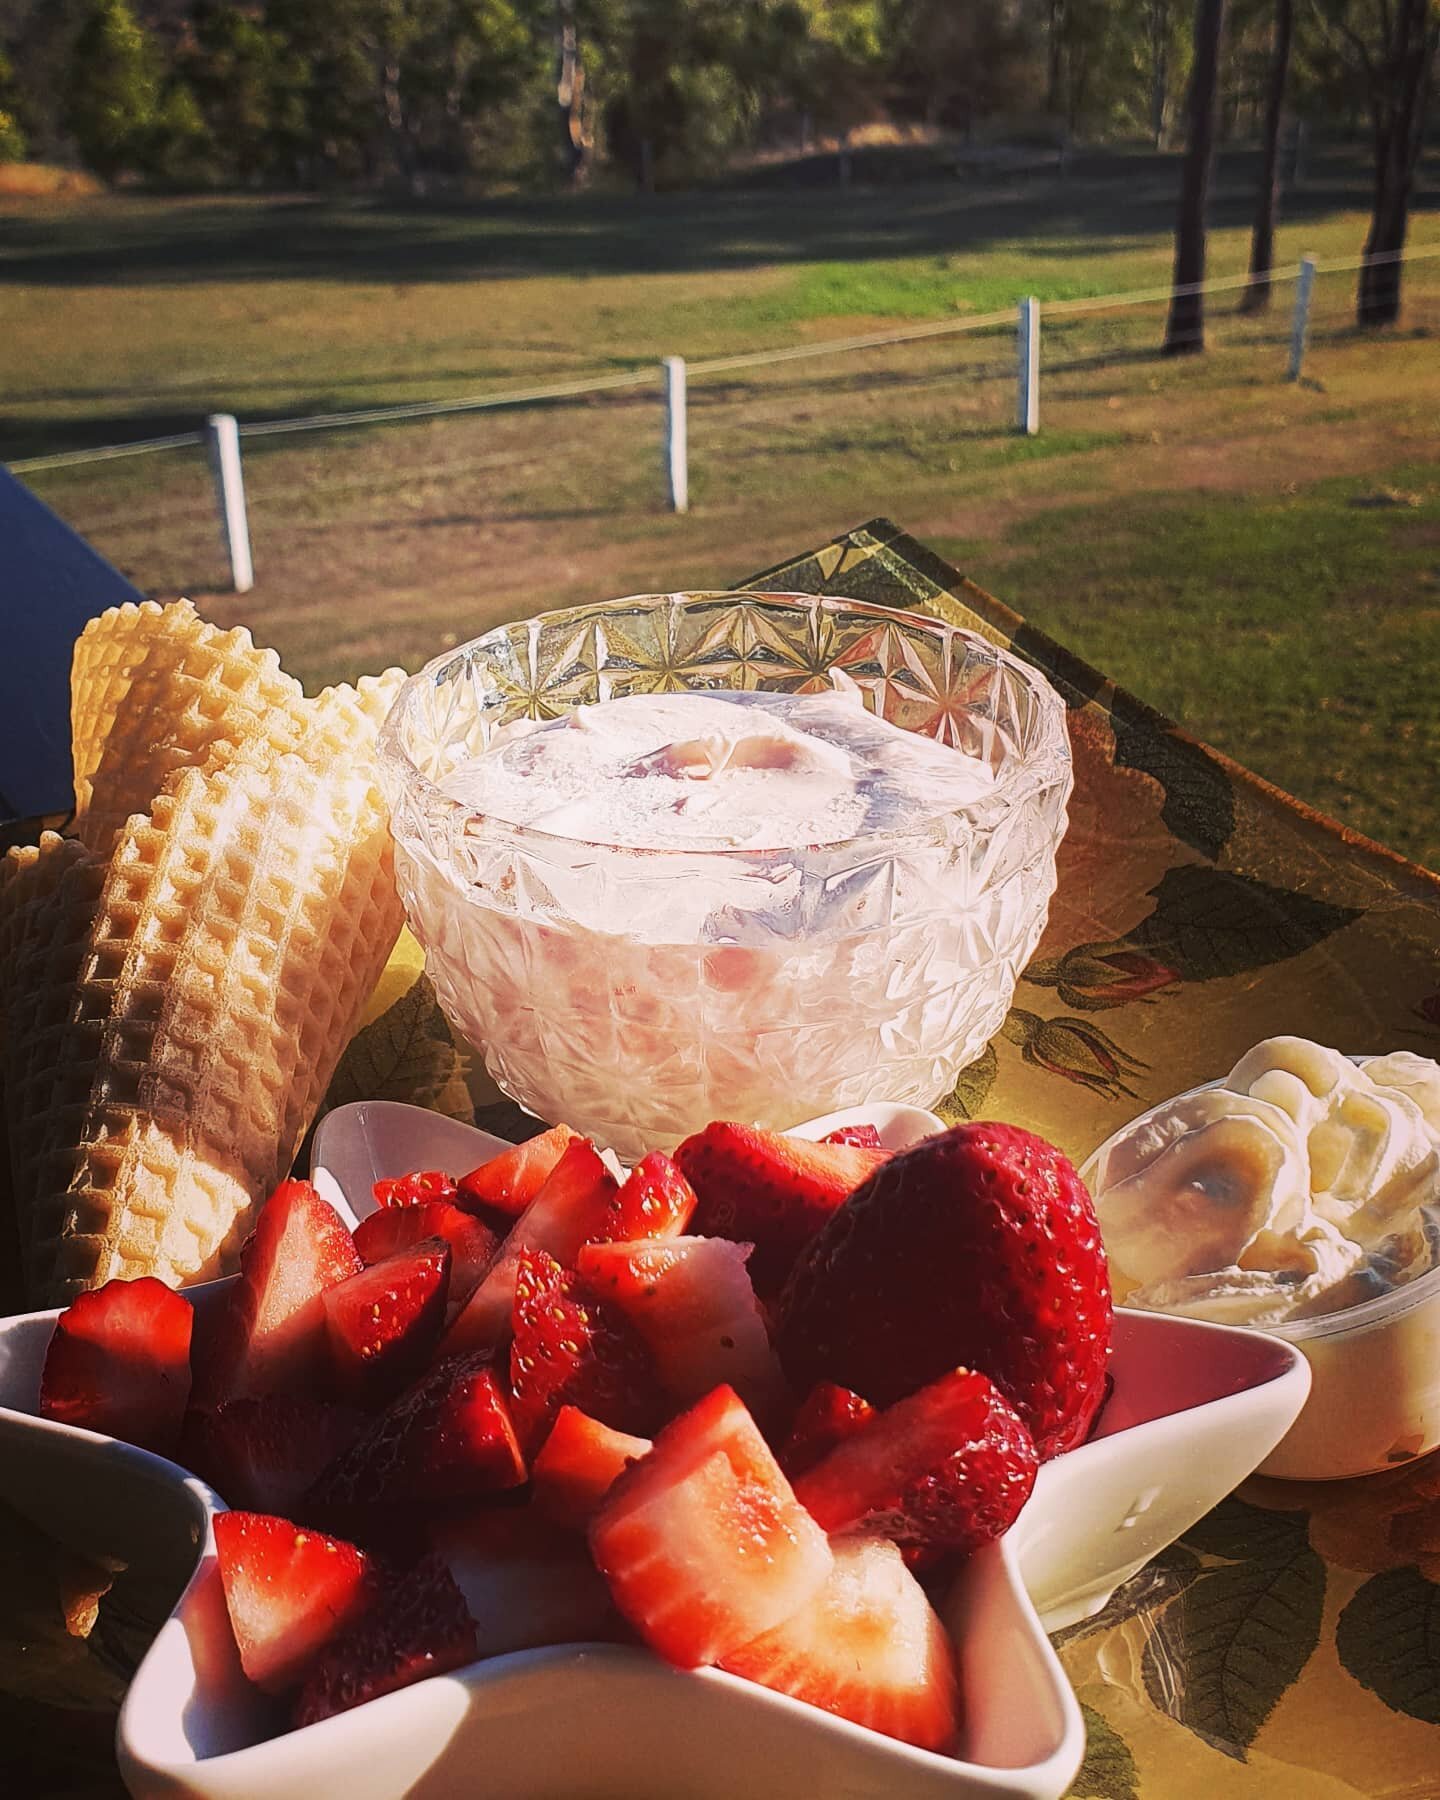 Ekka Day Icecream cones for our Cottage Guests. #homemadeicecream #Rosellaflavour #lovestrawberries 
#citycomestothecountry #sunshine